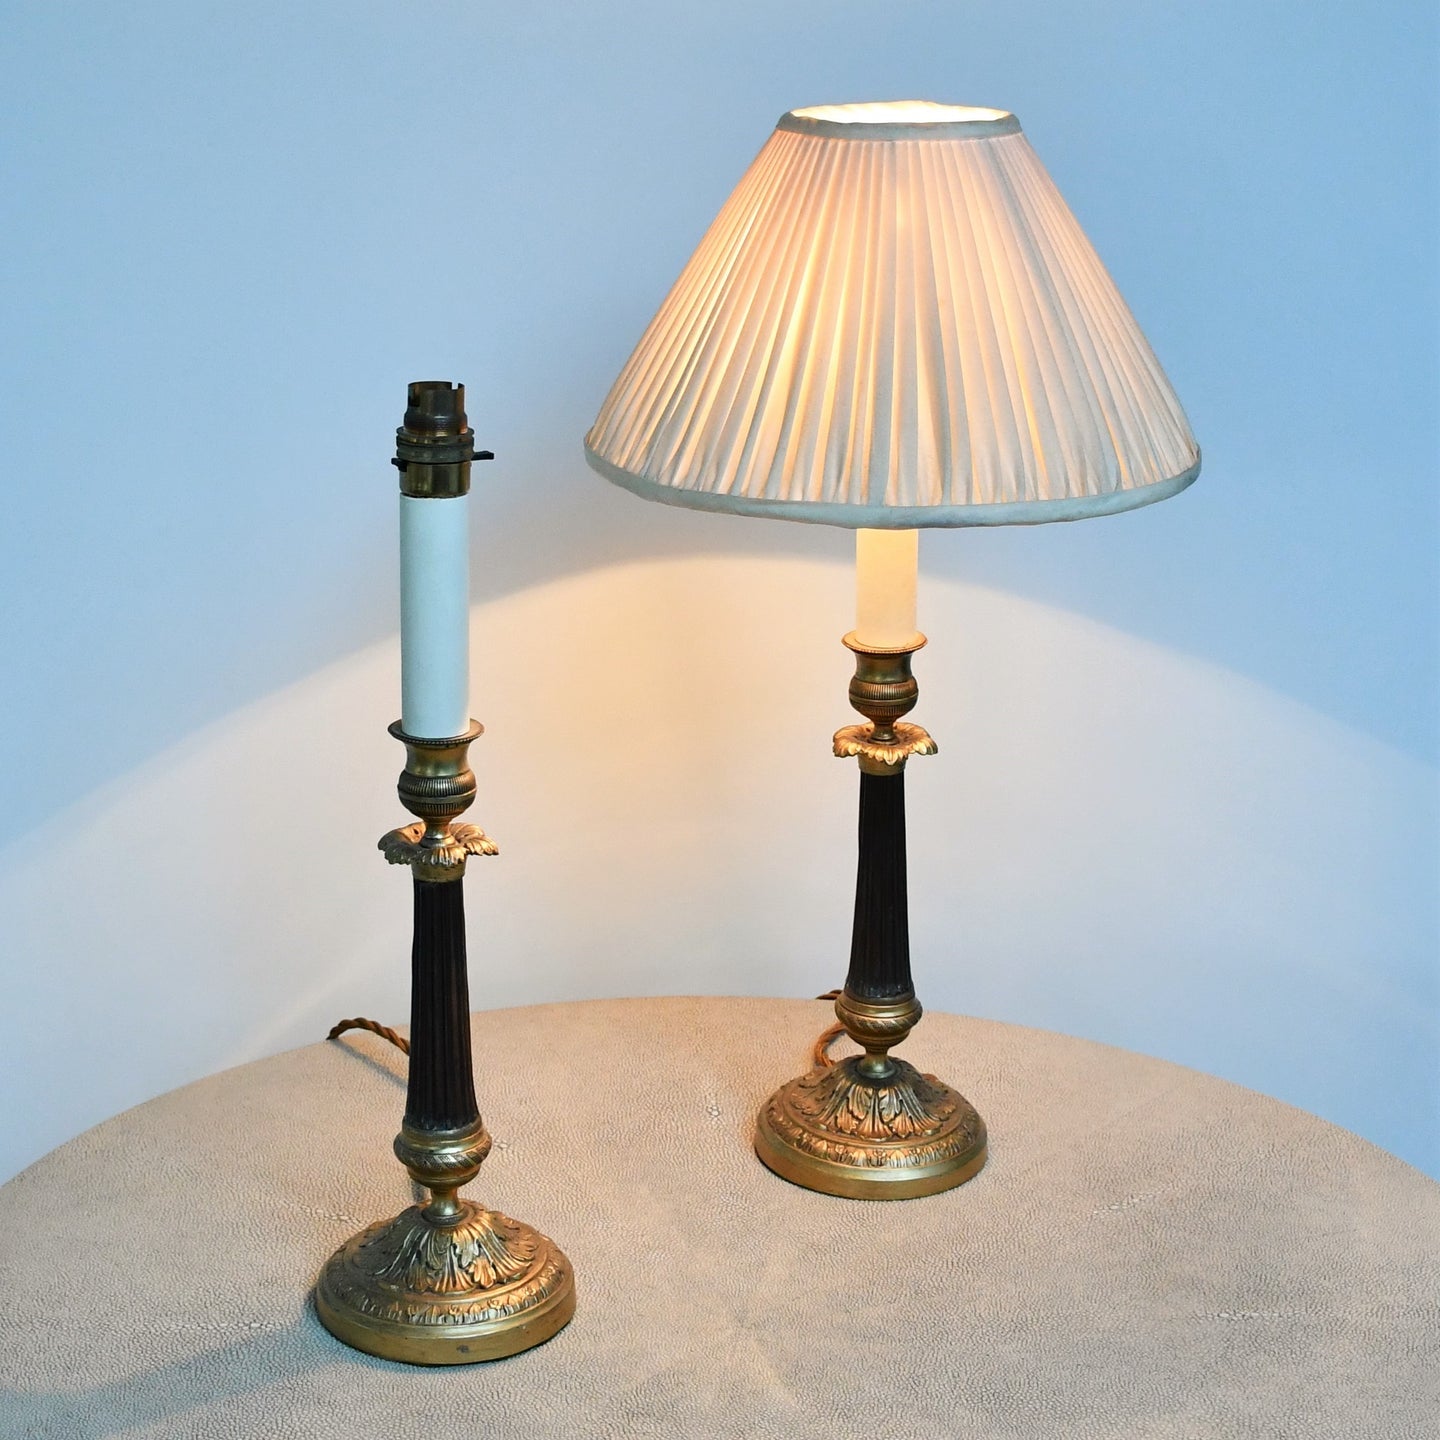 A Pair of Vintage French - Candlestick Table Lamps